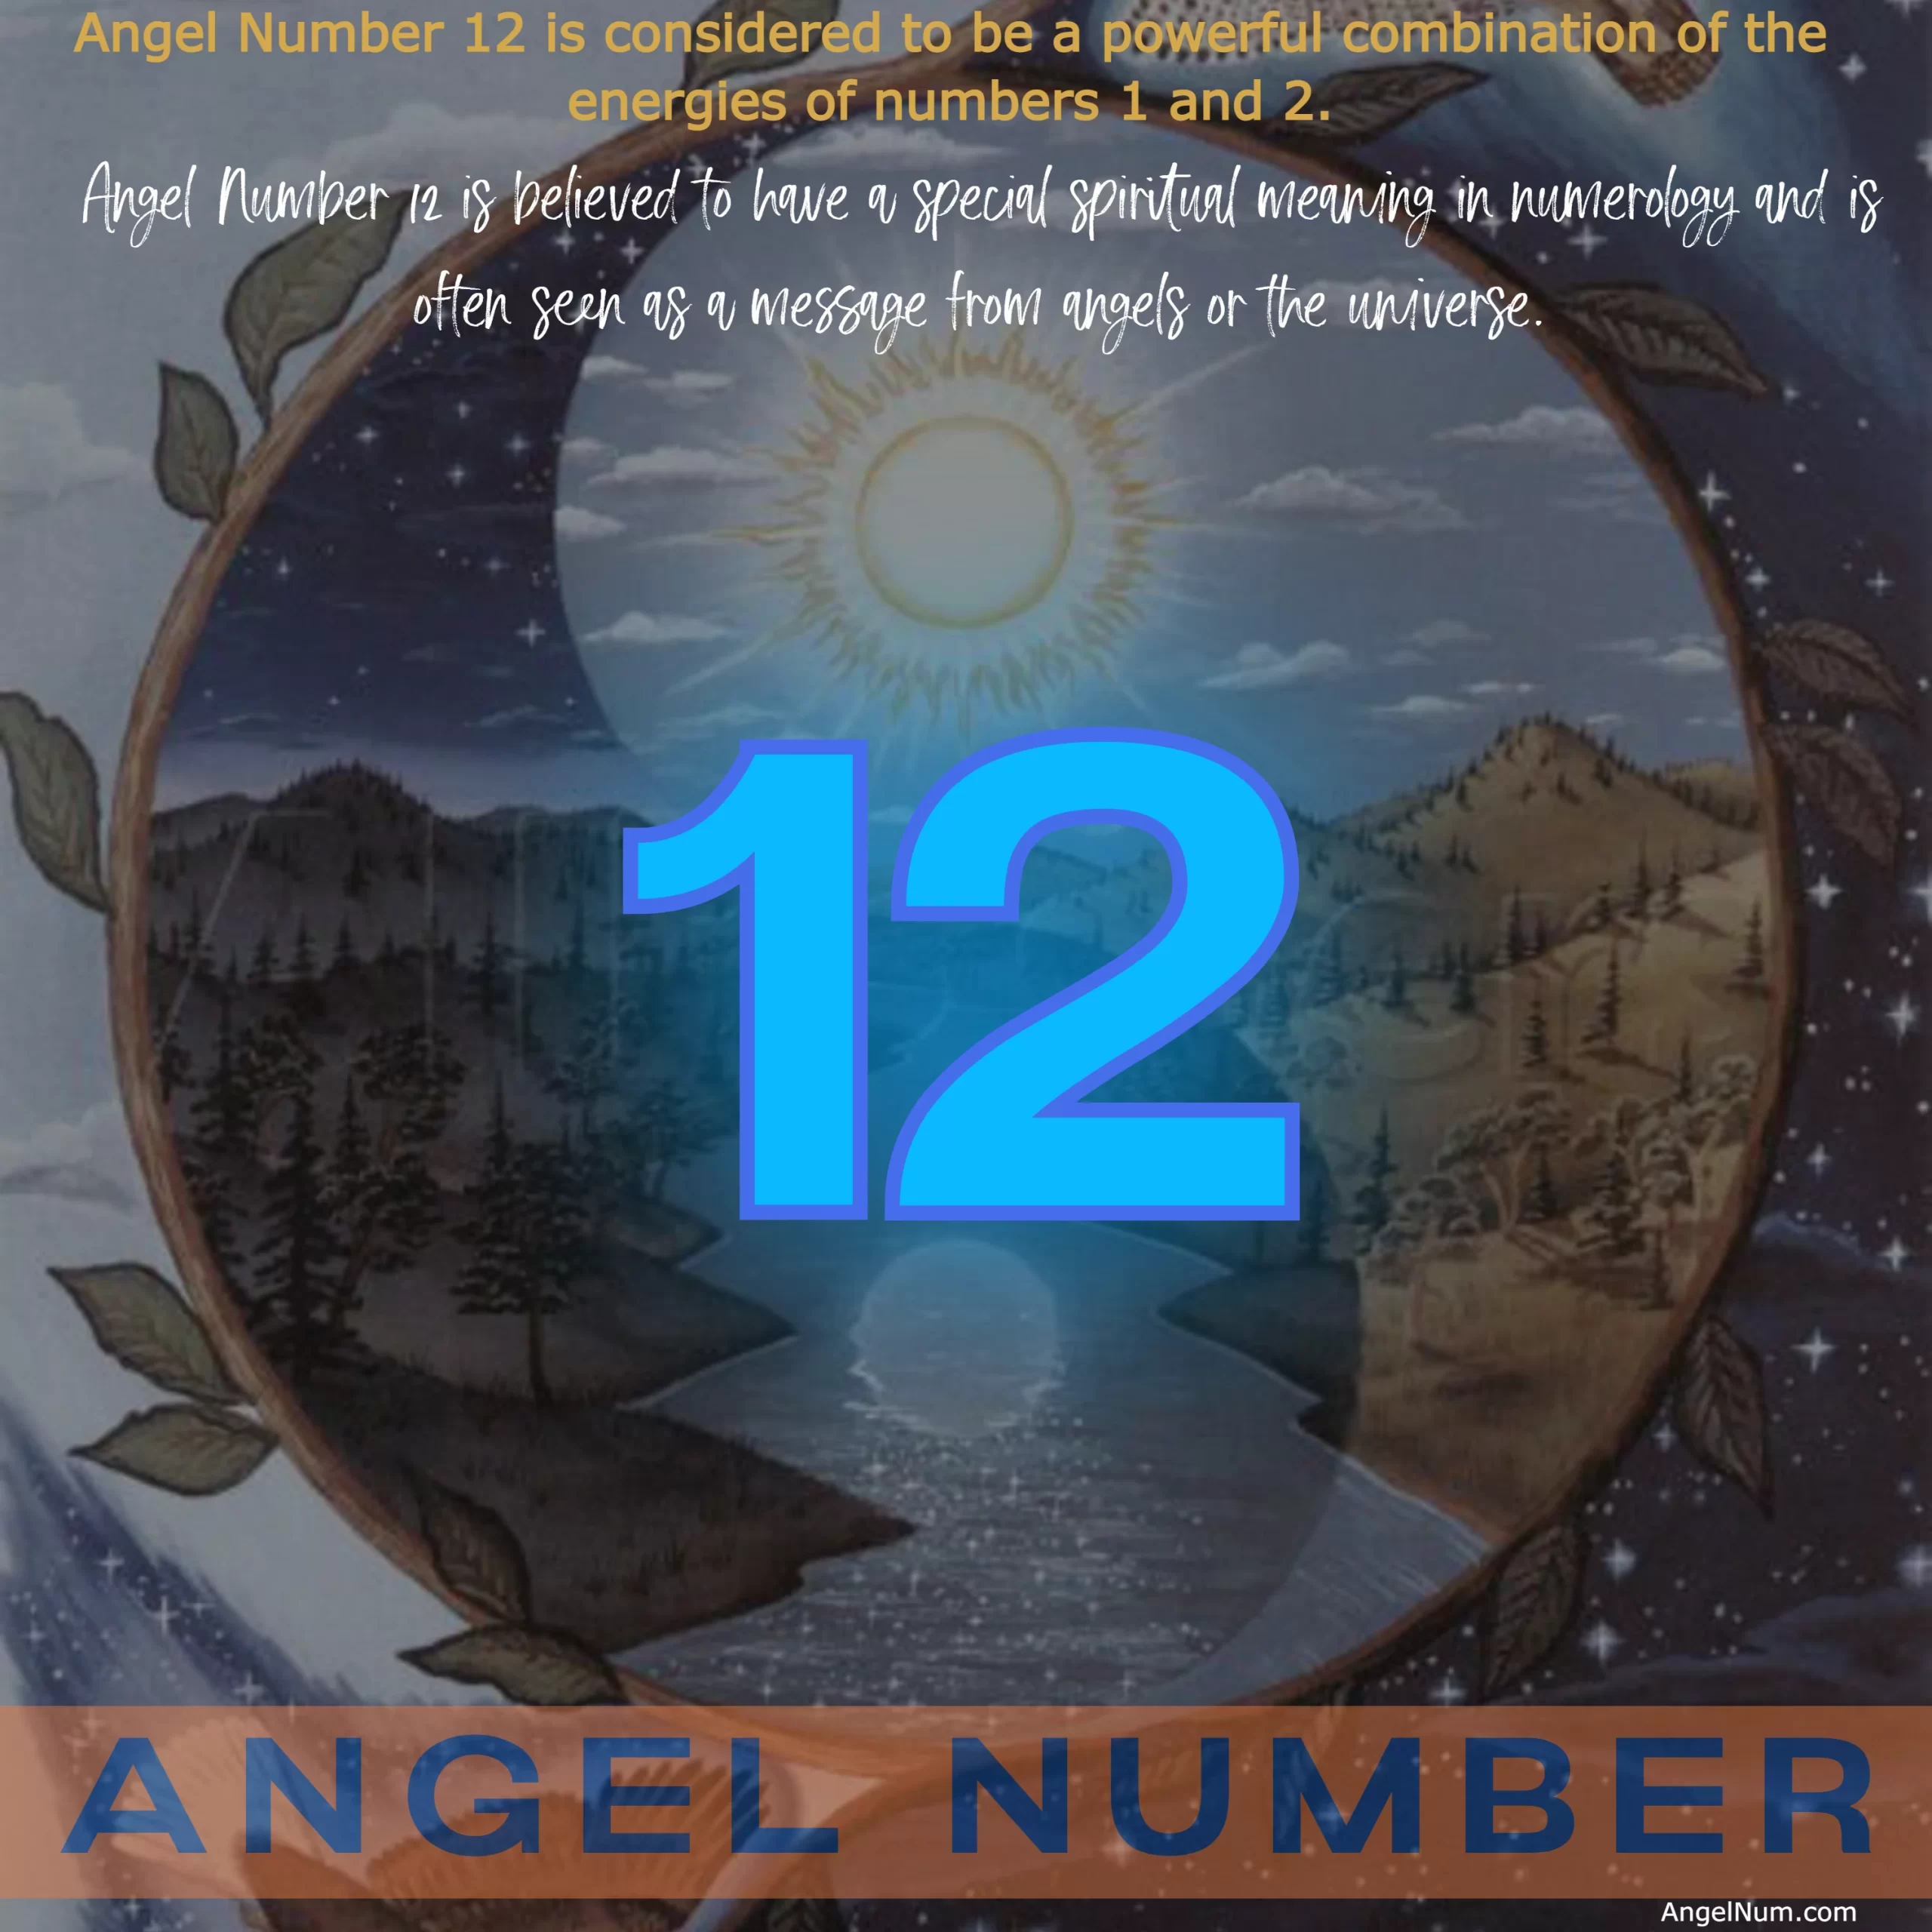 Discover the spiritual meaning and symbolism of Angel Number 12. Explore its significance in numerology, tarot, and different cultures.